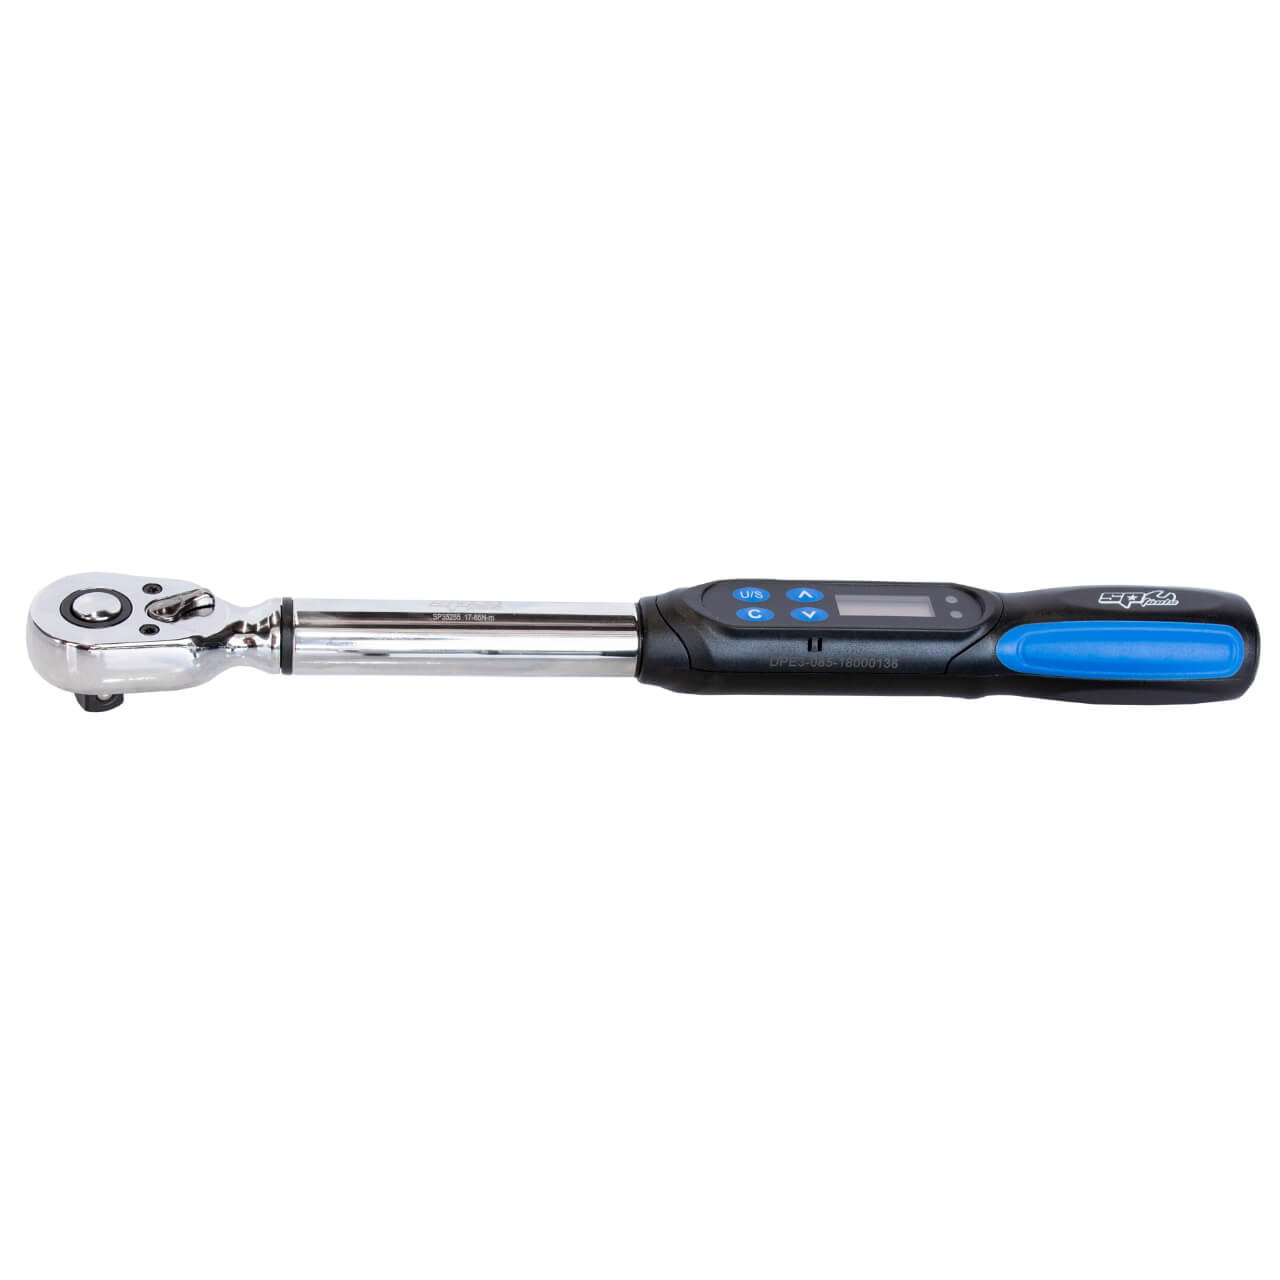 SP Tools 3/8 Dr 4.2-85nm Digital Torque Wrench